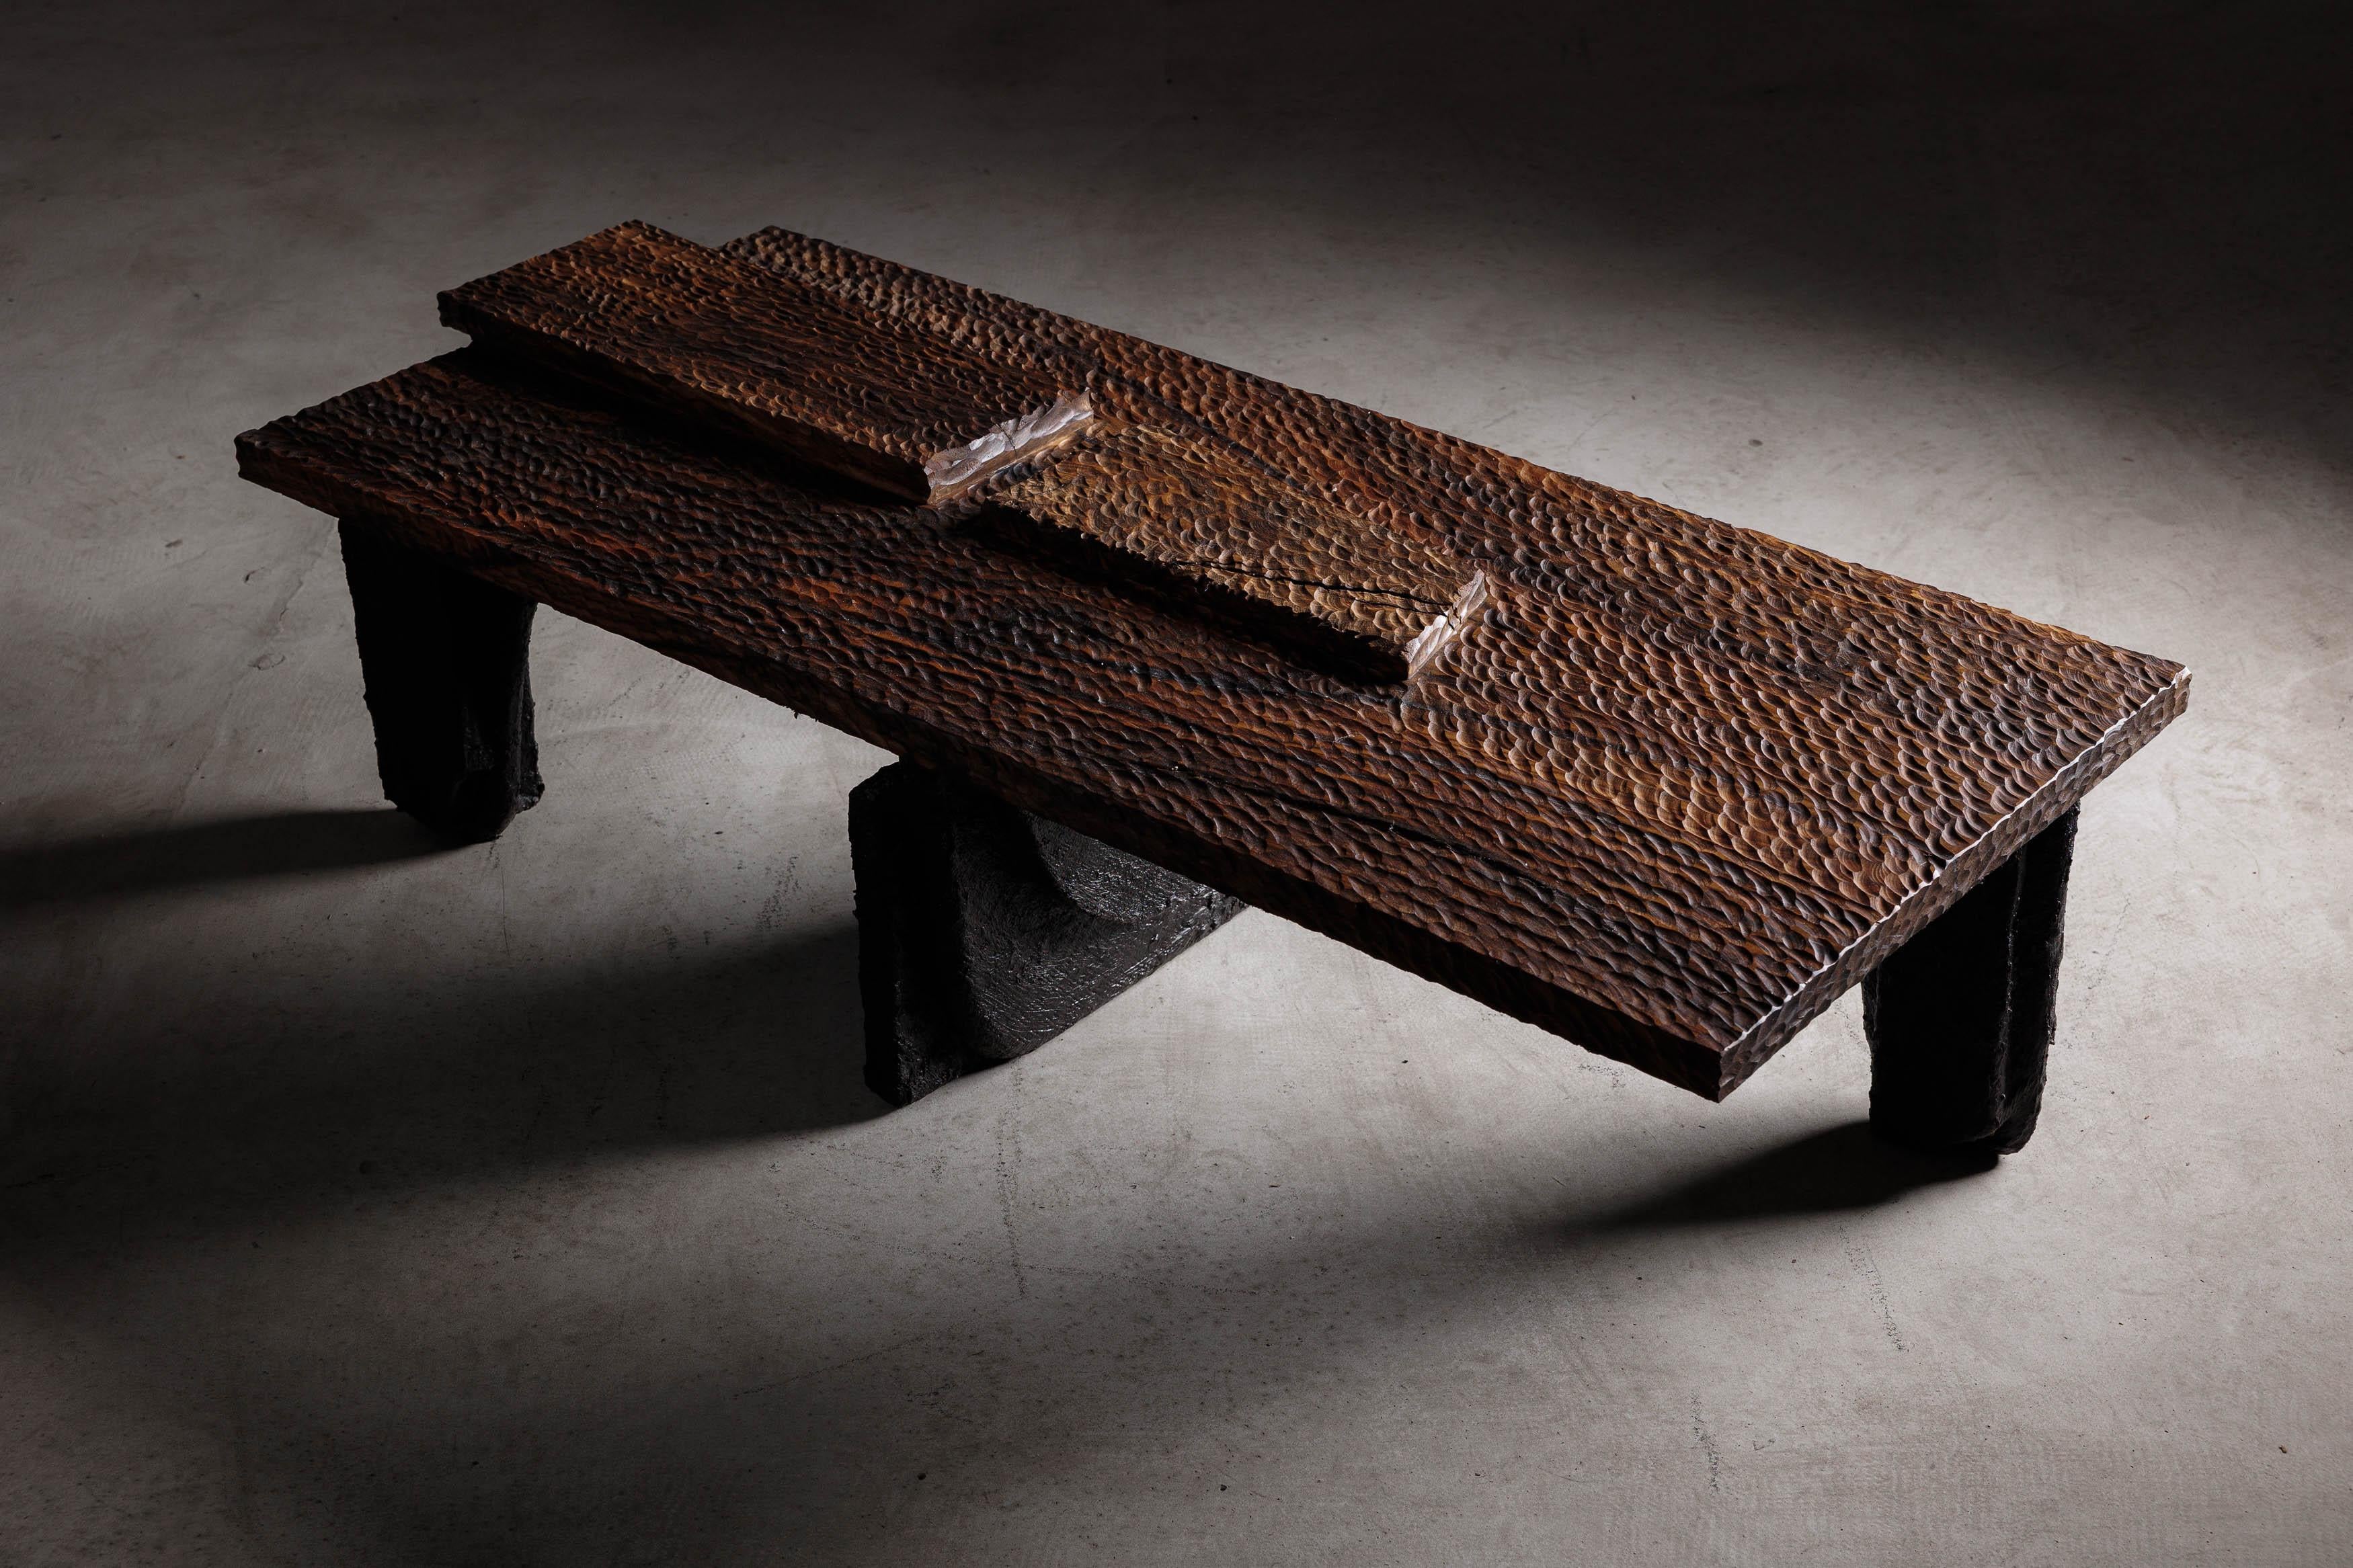 EM101 coffee table by Eero Moss
One of a kind
Dimensions; W 134 x D 55 x H 36 cm
Materials: Walnut, ash, acrylic resin, India ink.
Finish: Natural oils.

18 Brut Collection

The latest collection by the artist is a tribute to the Brutalist